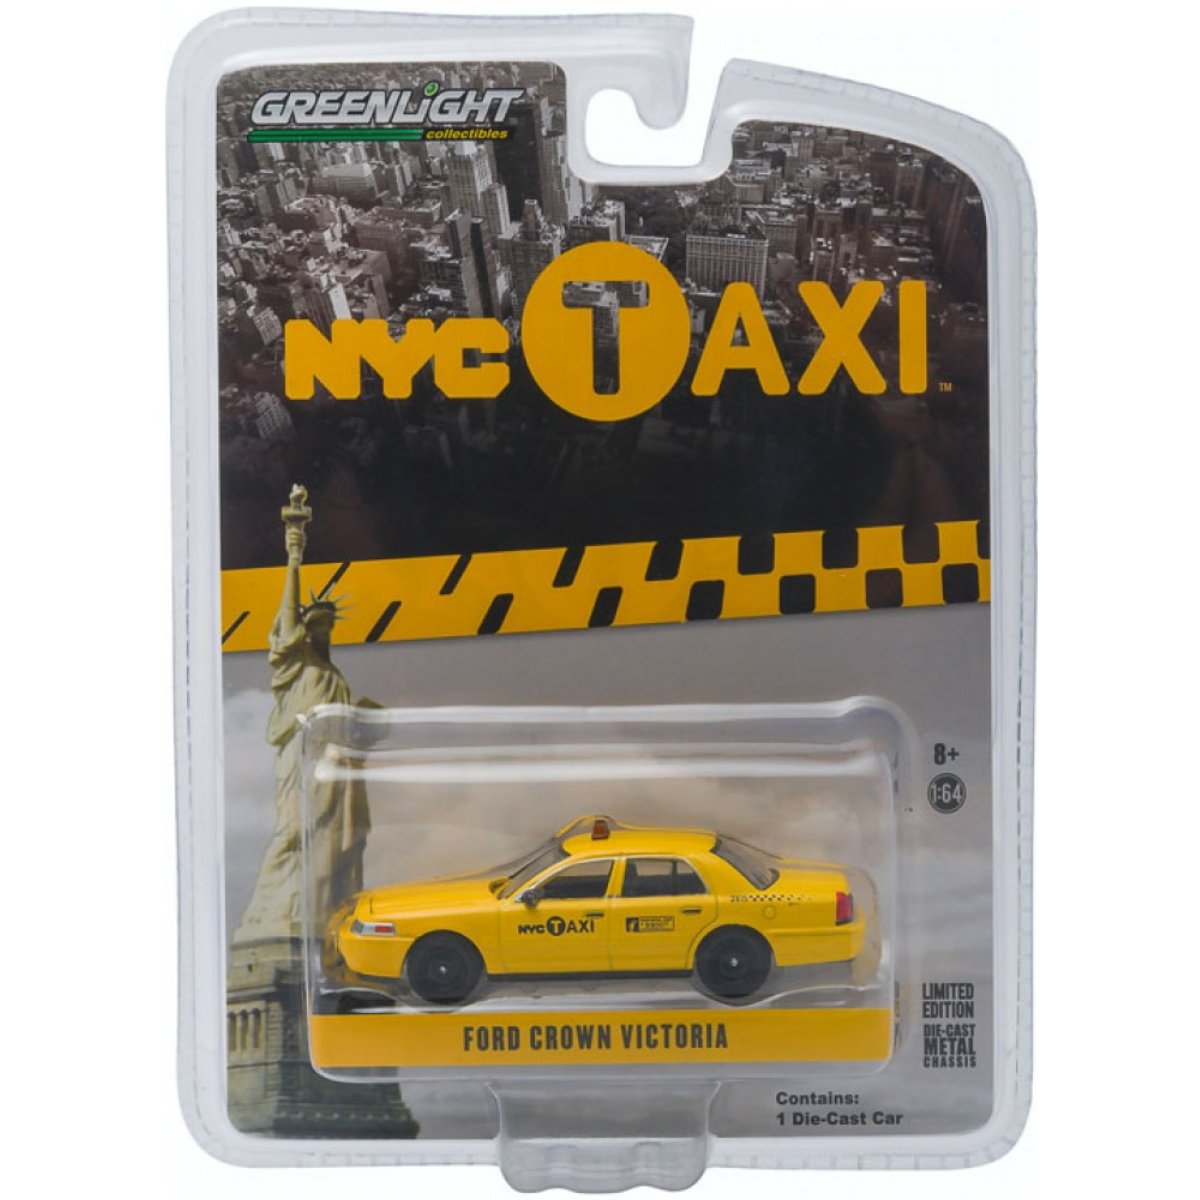 Greenlight Model Car - Ford Crown Victoria NYC Taxi - 1:64 Scale